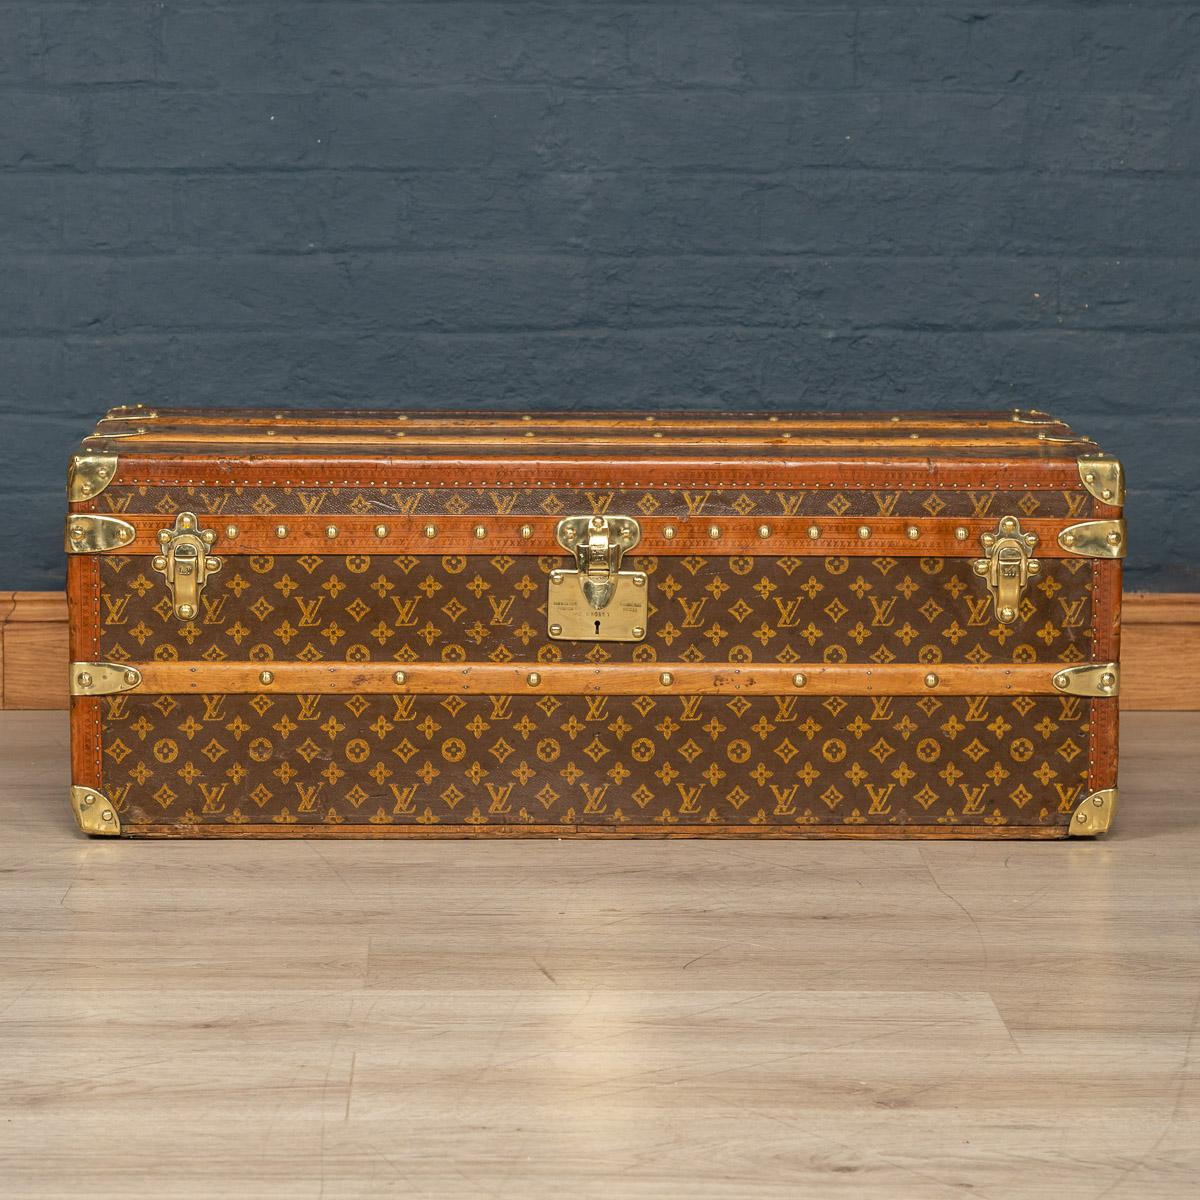 Antique early 20th century Louis Vuitton trunk covered in the world famous LV monogrammed canvas, with its lozine borders and brass fitting this trunk would have been the top of the line even at the time of purchase some 100 years ago. This